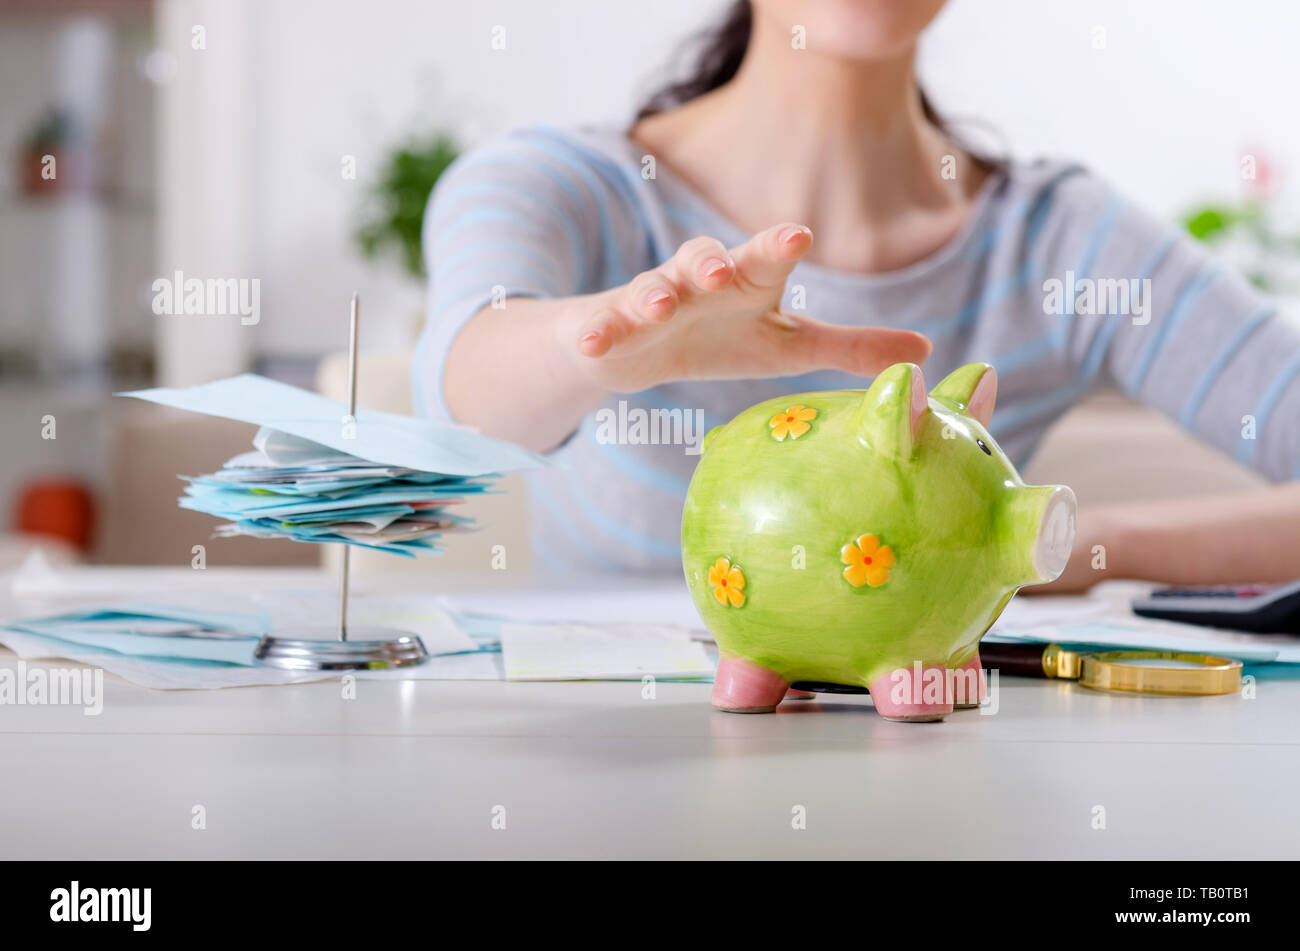 Young woman in budget planning concept Stock Photo